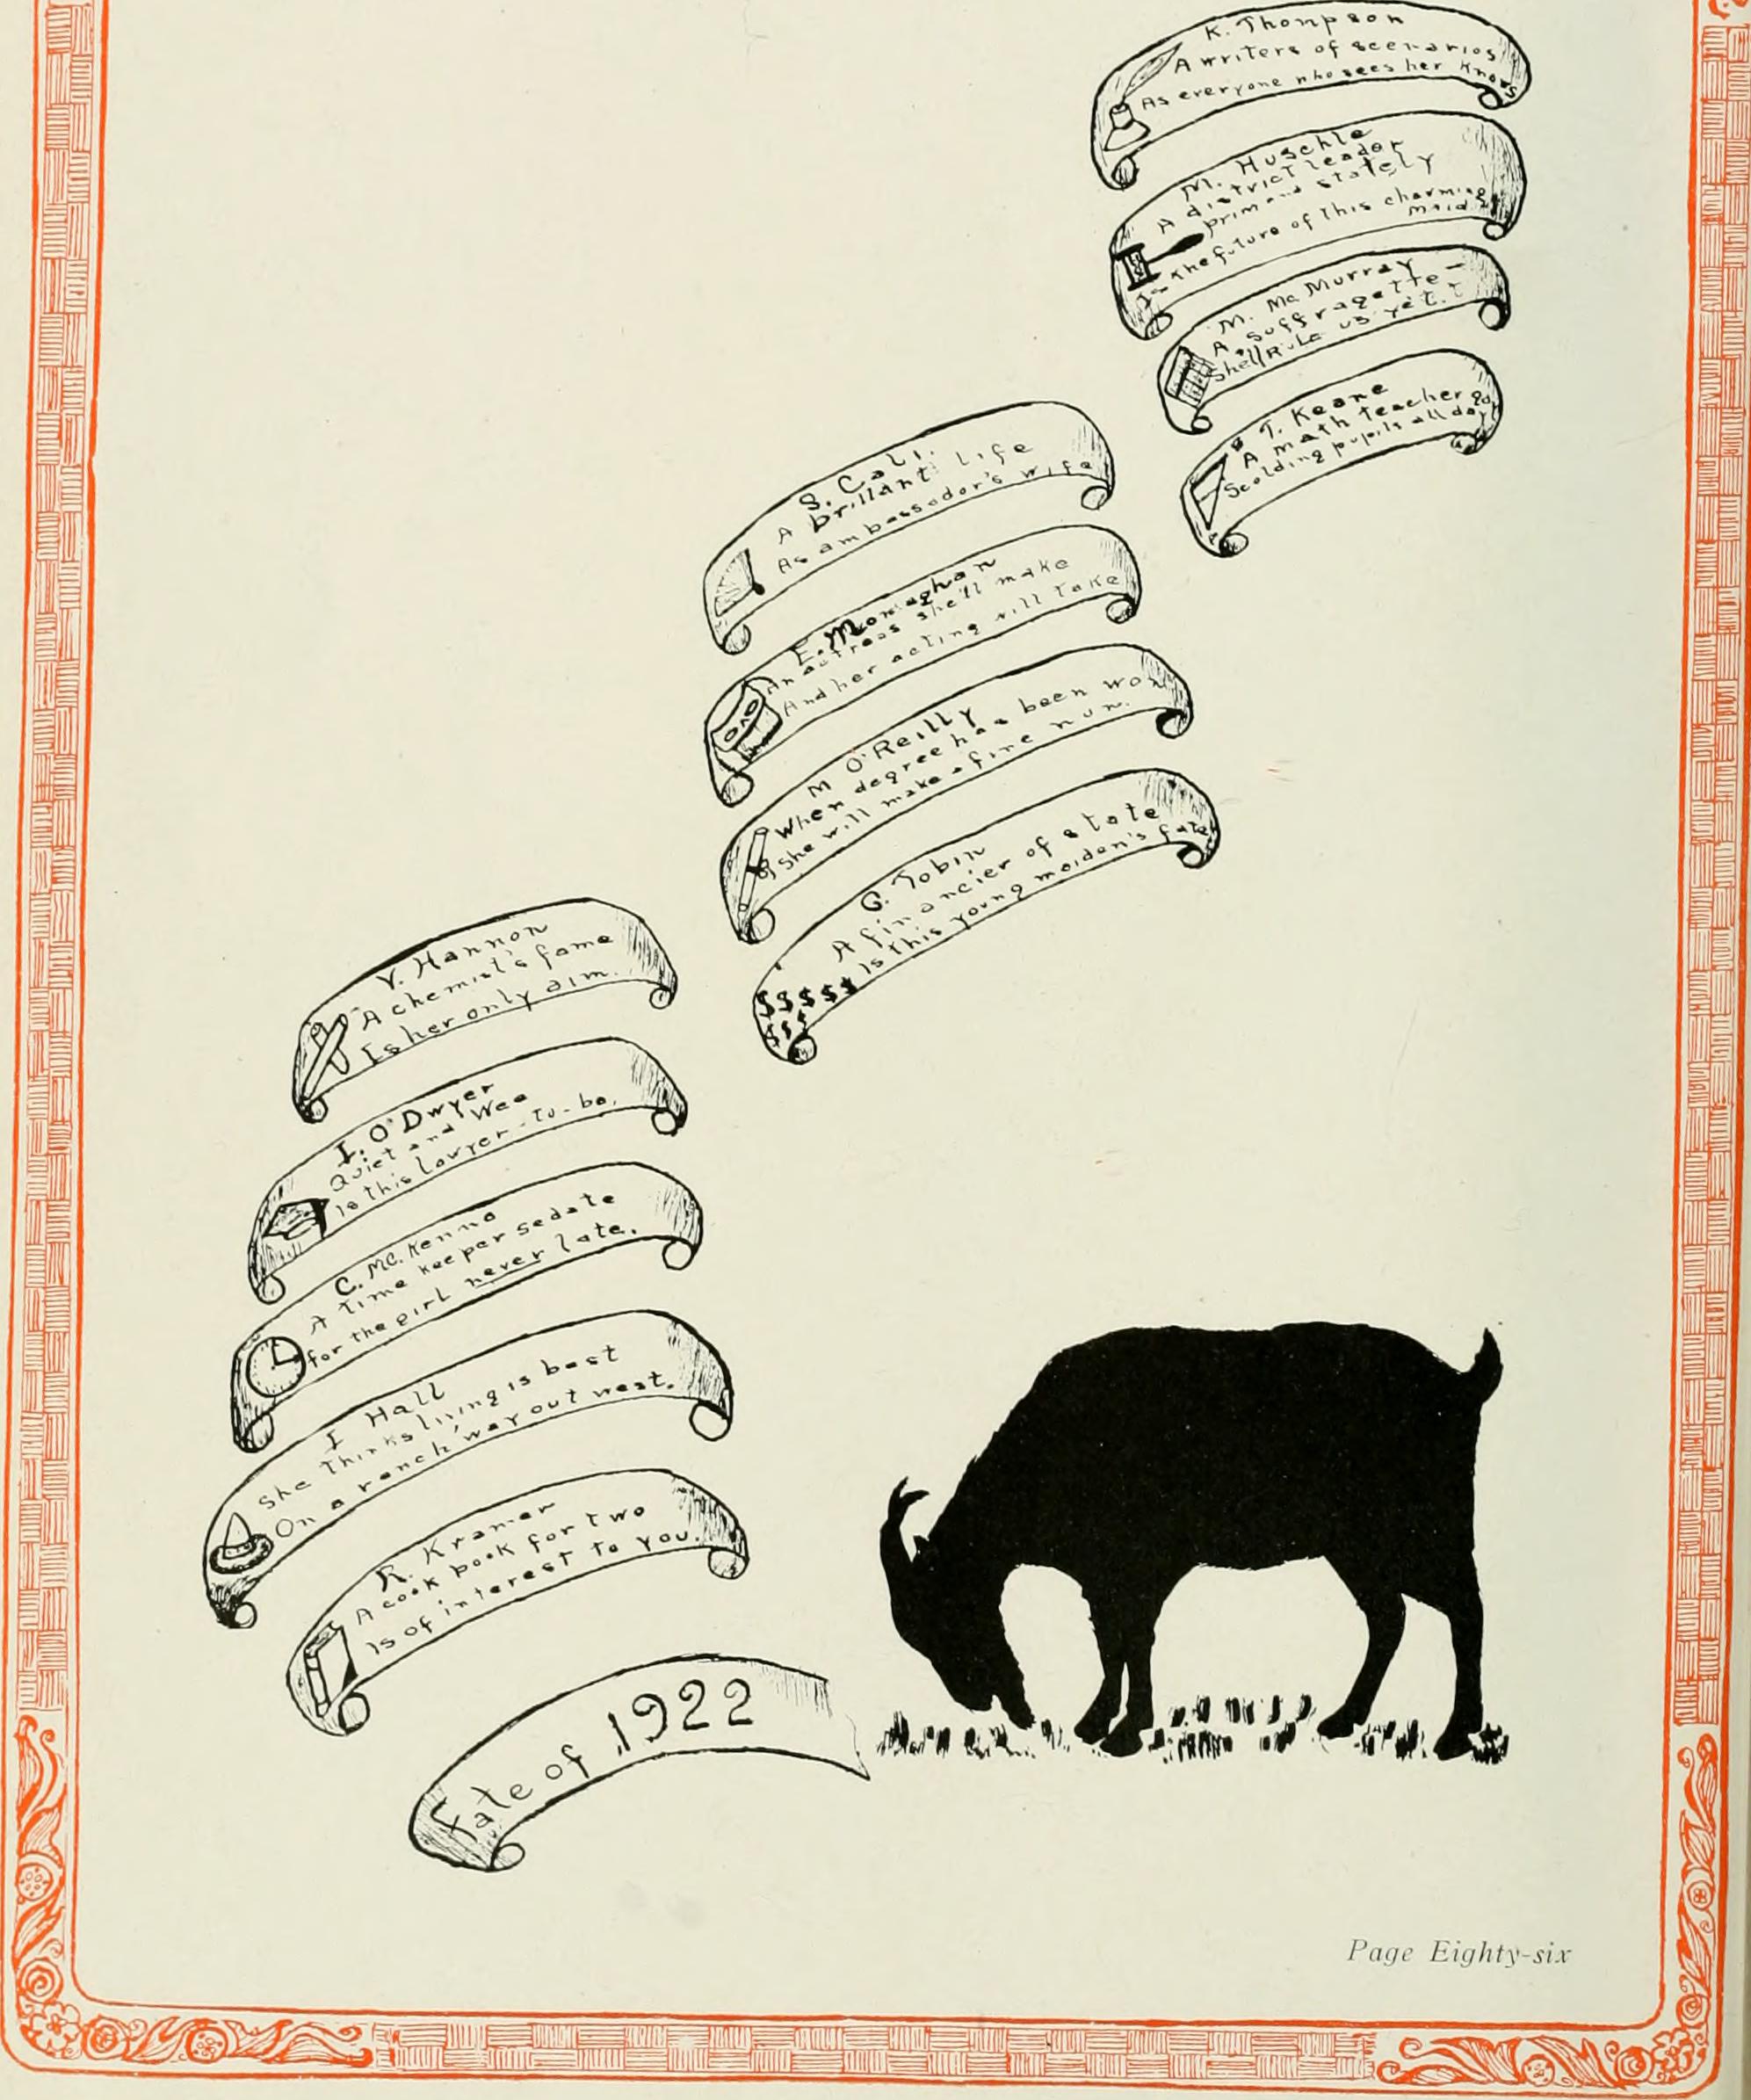 Image from page 89 of "Footprints" (1922)